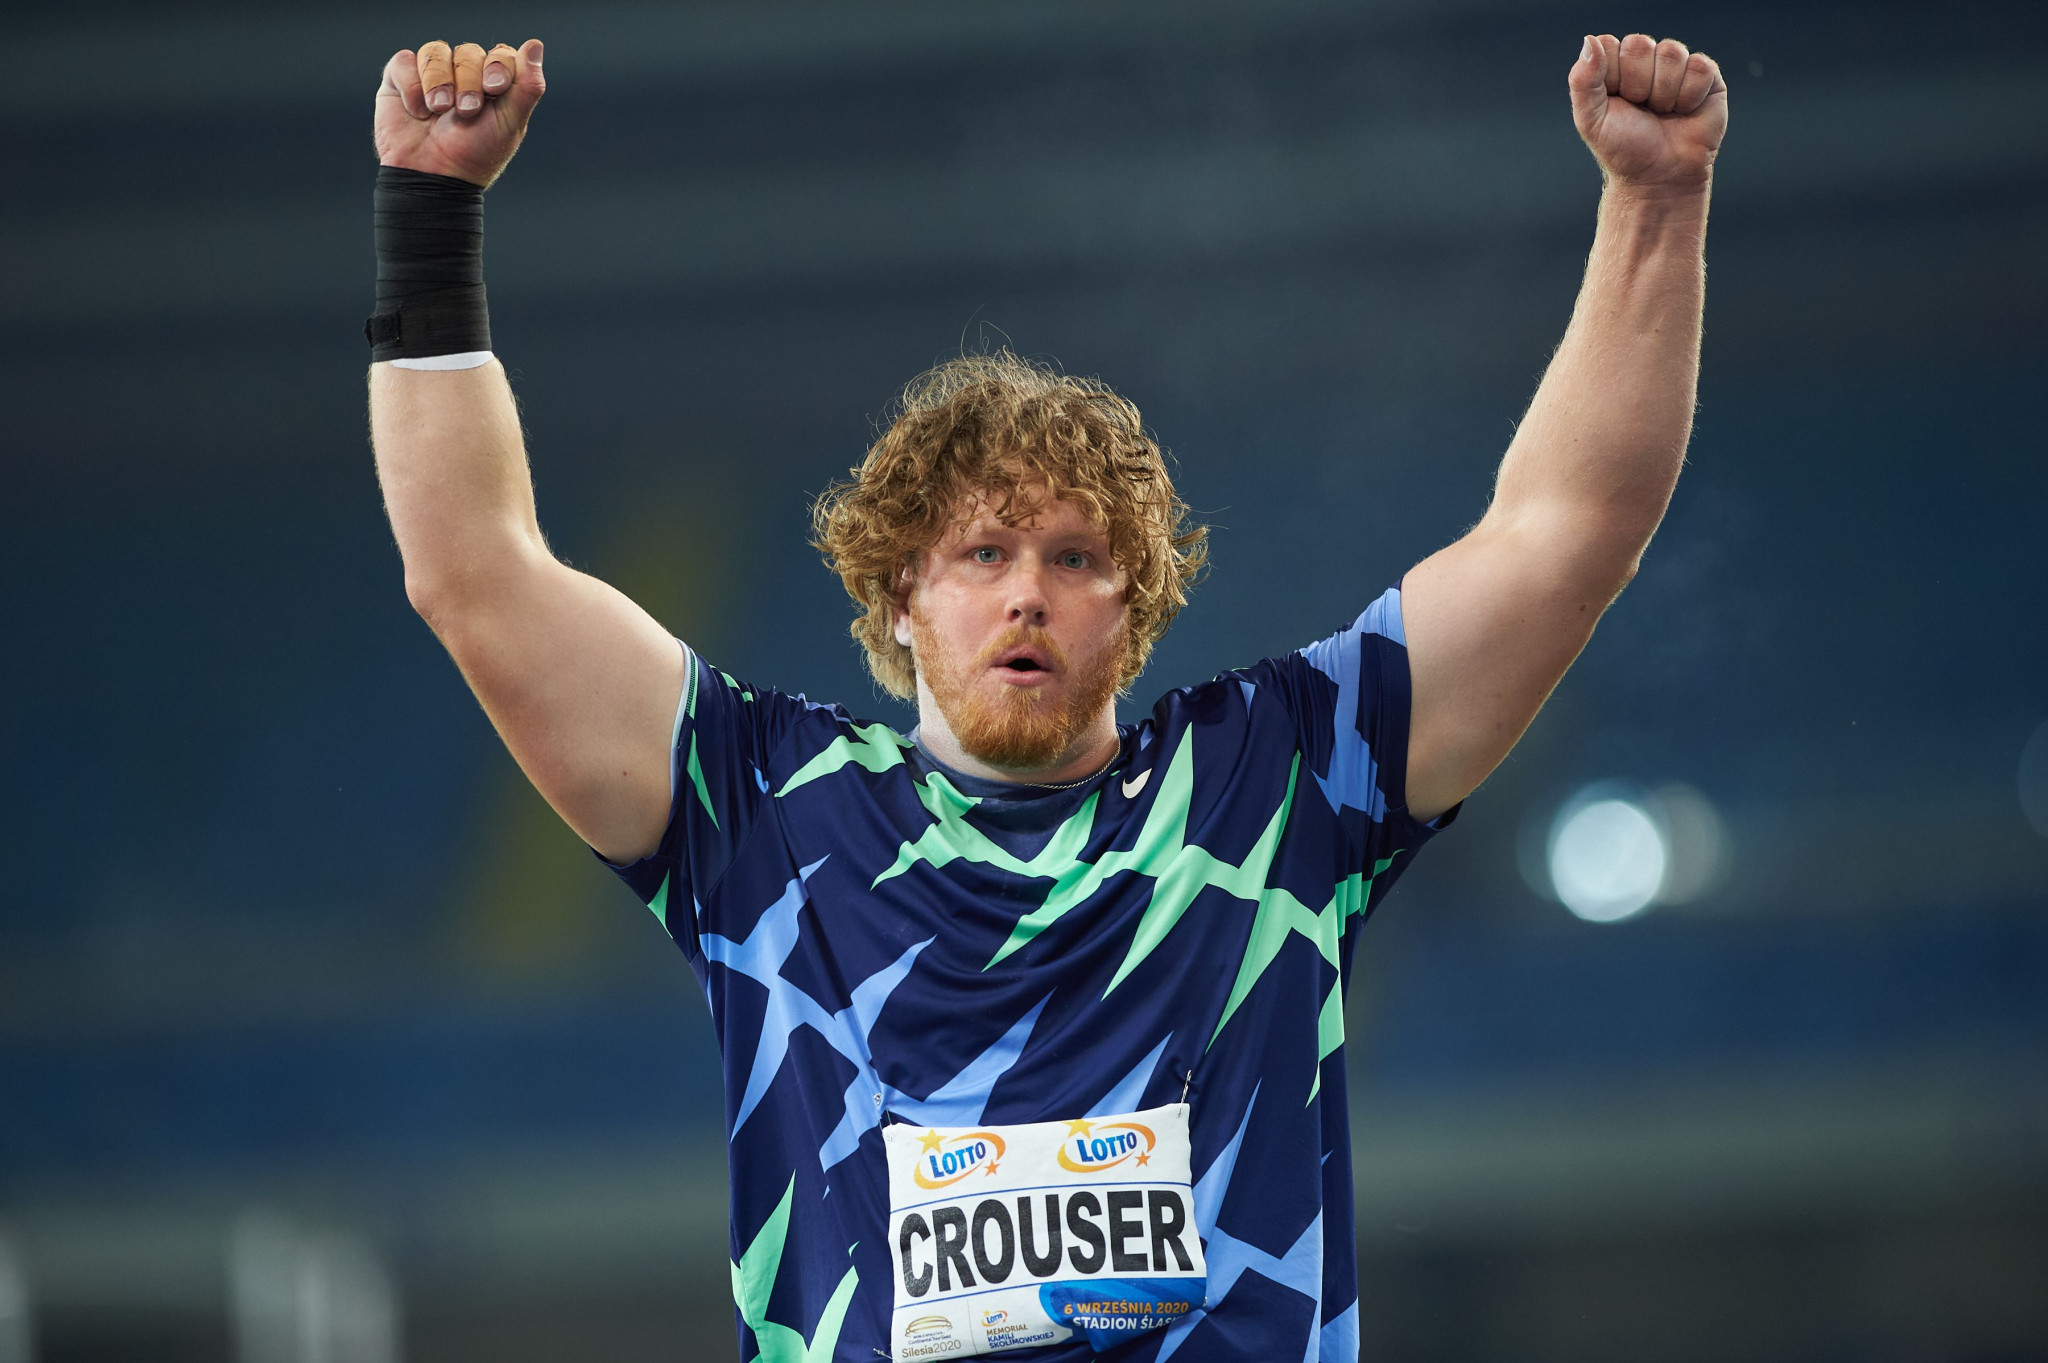 Olympic champion Crouser sets new indoor shot put world record